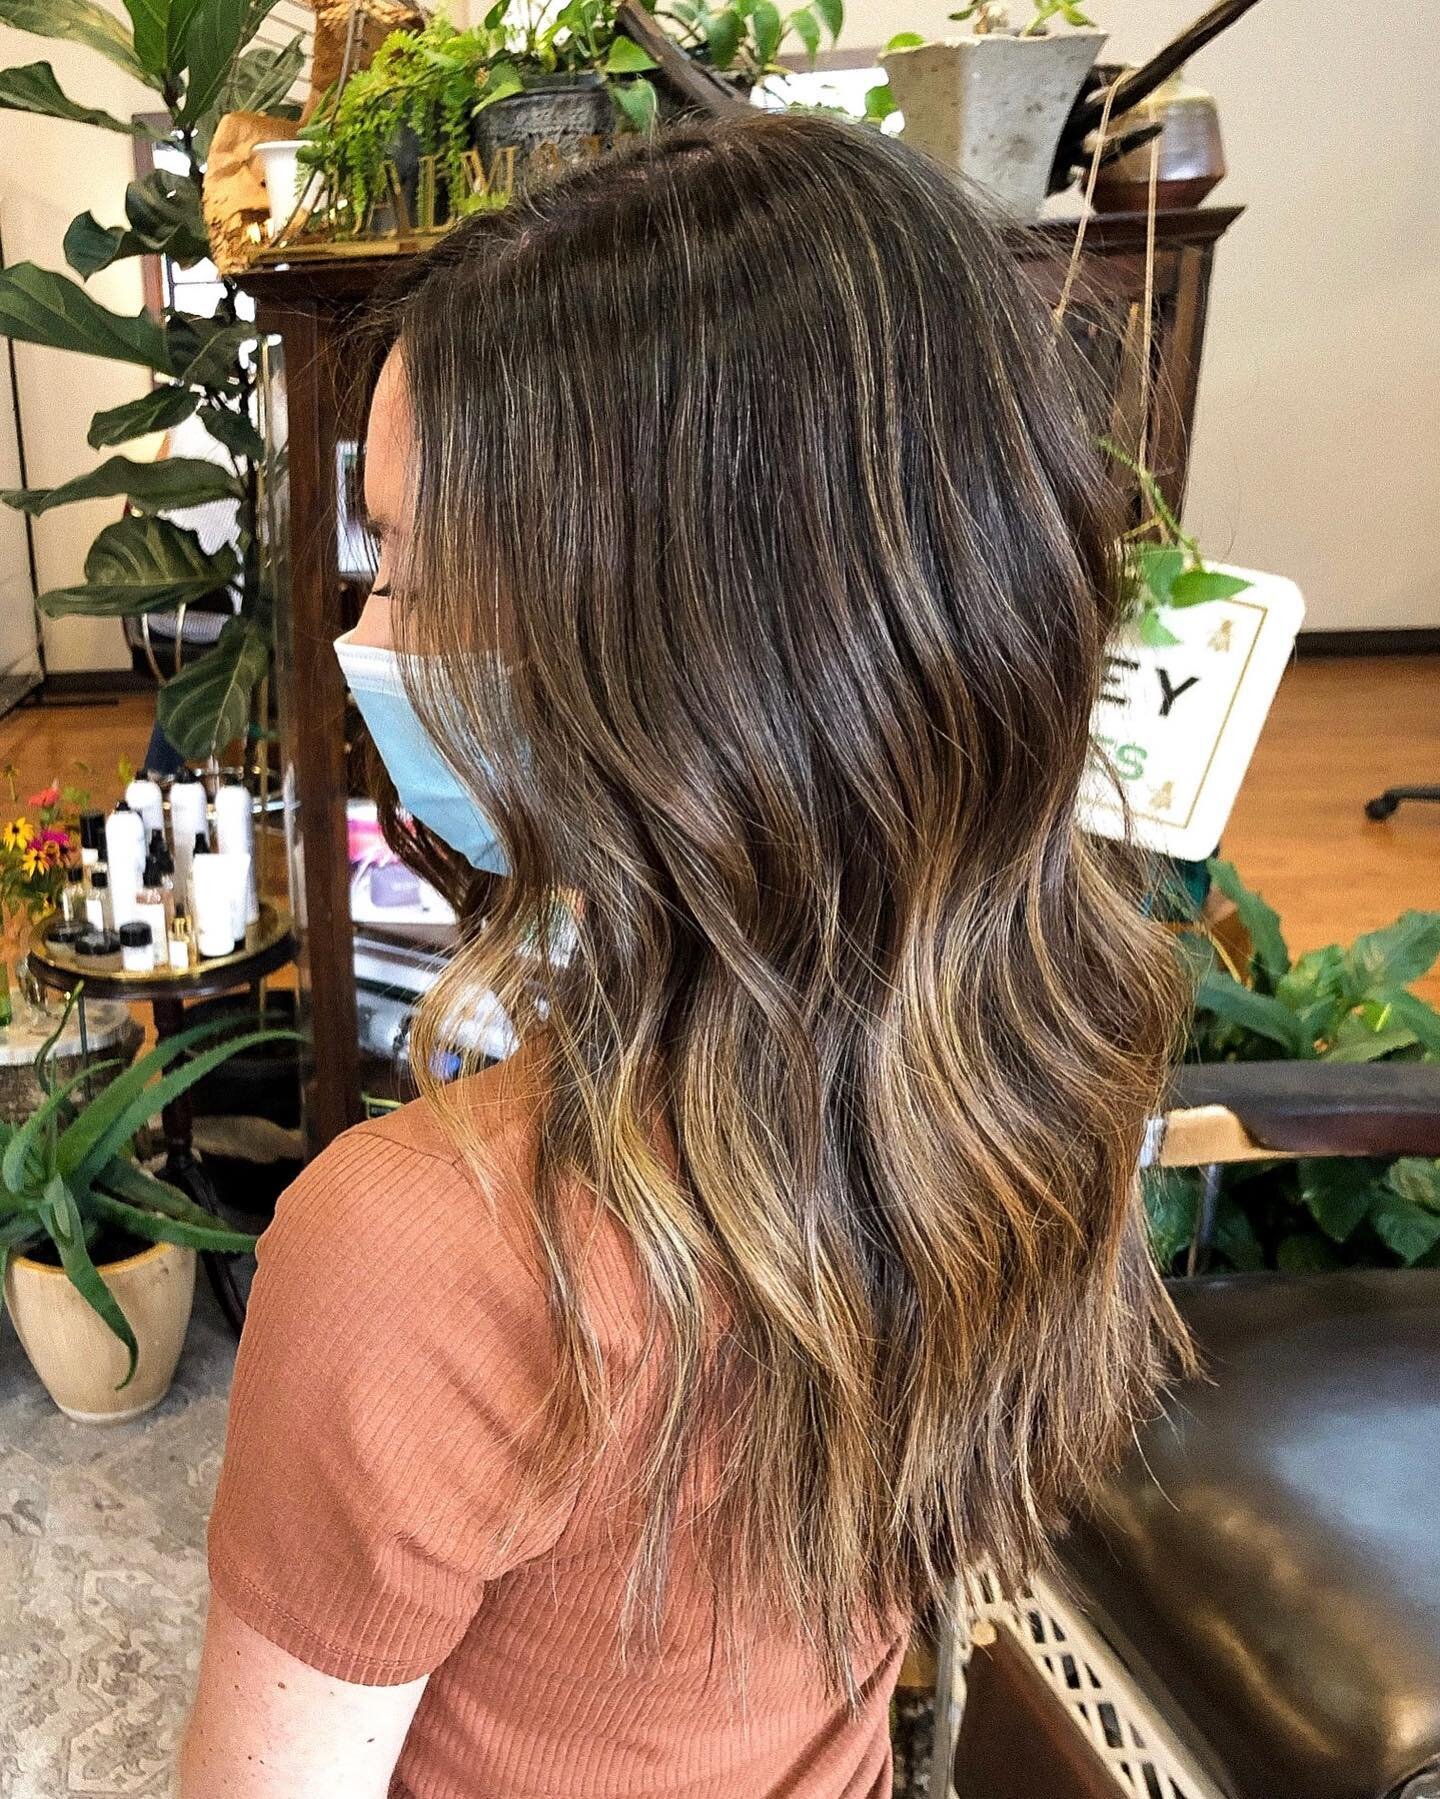 Fall is here and I&rsquo;m so excited for all the warm tones I&rsquo;m seeing 🍂 ⁣
⁣
Thank you so much for the trust, Jennifer! It&rsquo;s always a pleasure doing your hair :)⁣
⁣
#gsohairstylist #localhoneysalon